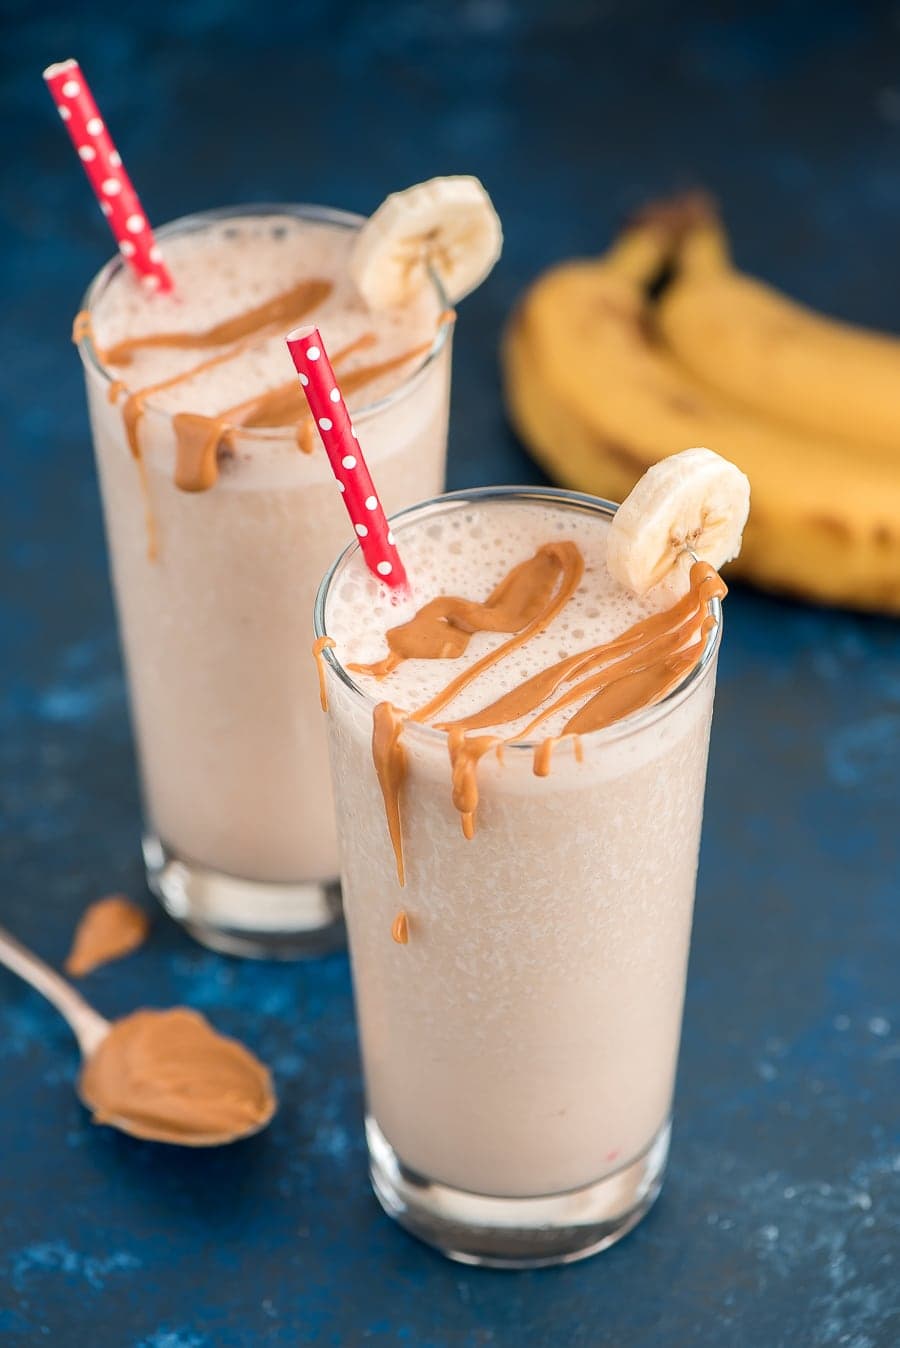 Peanut Butter Banana Smoothie Recipe in two glasses with straws.